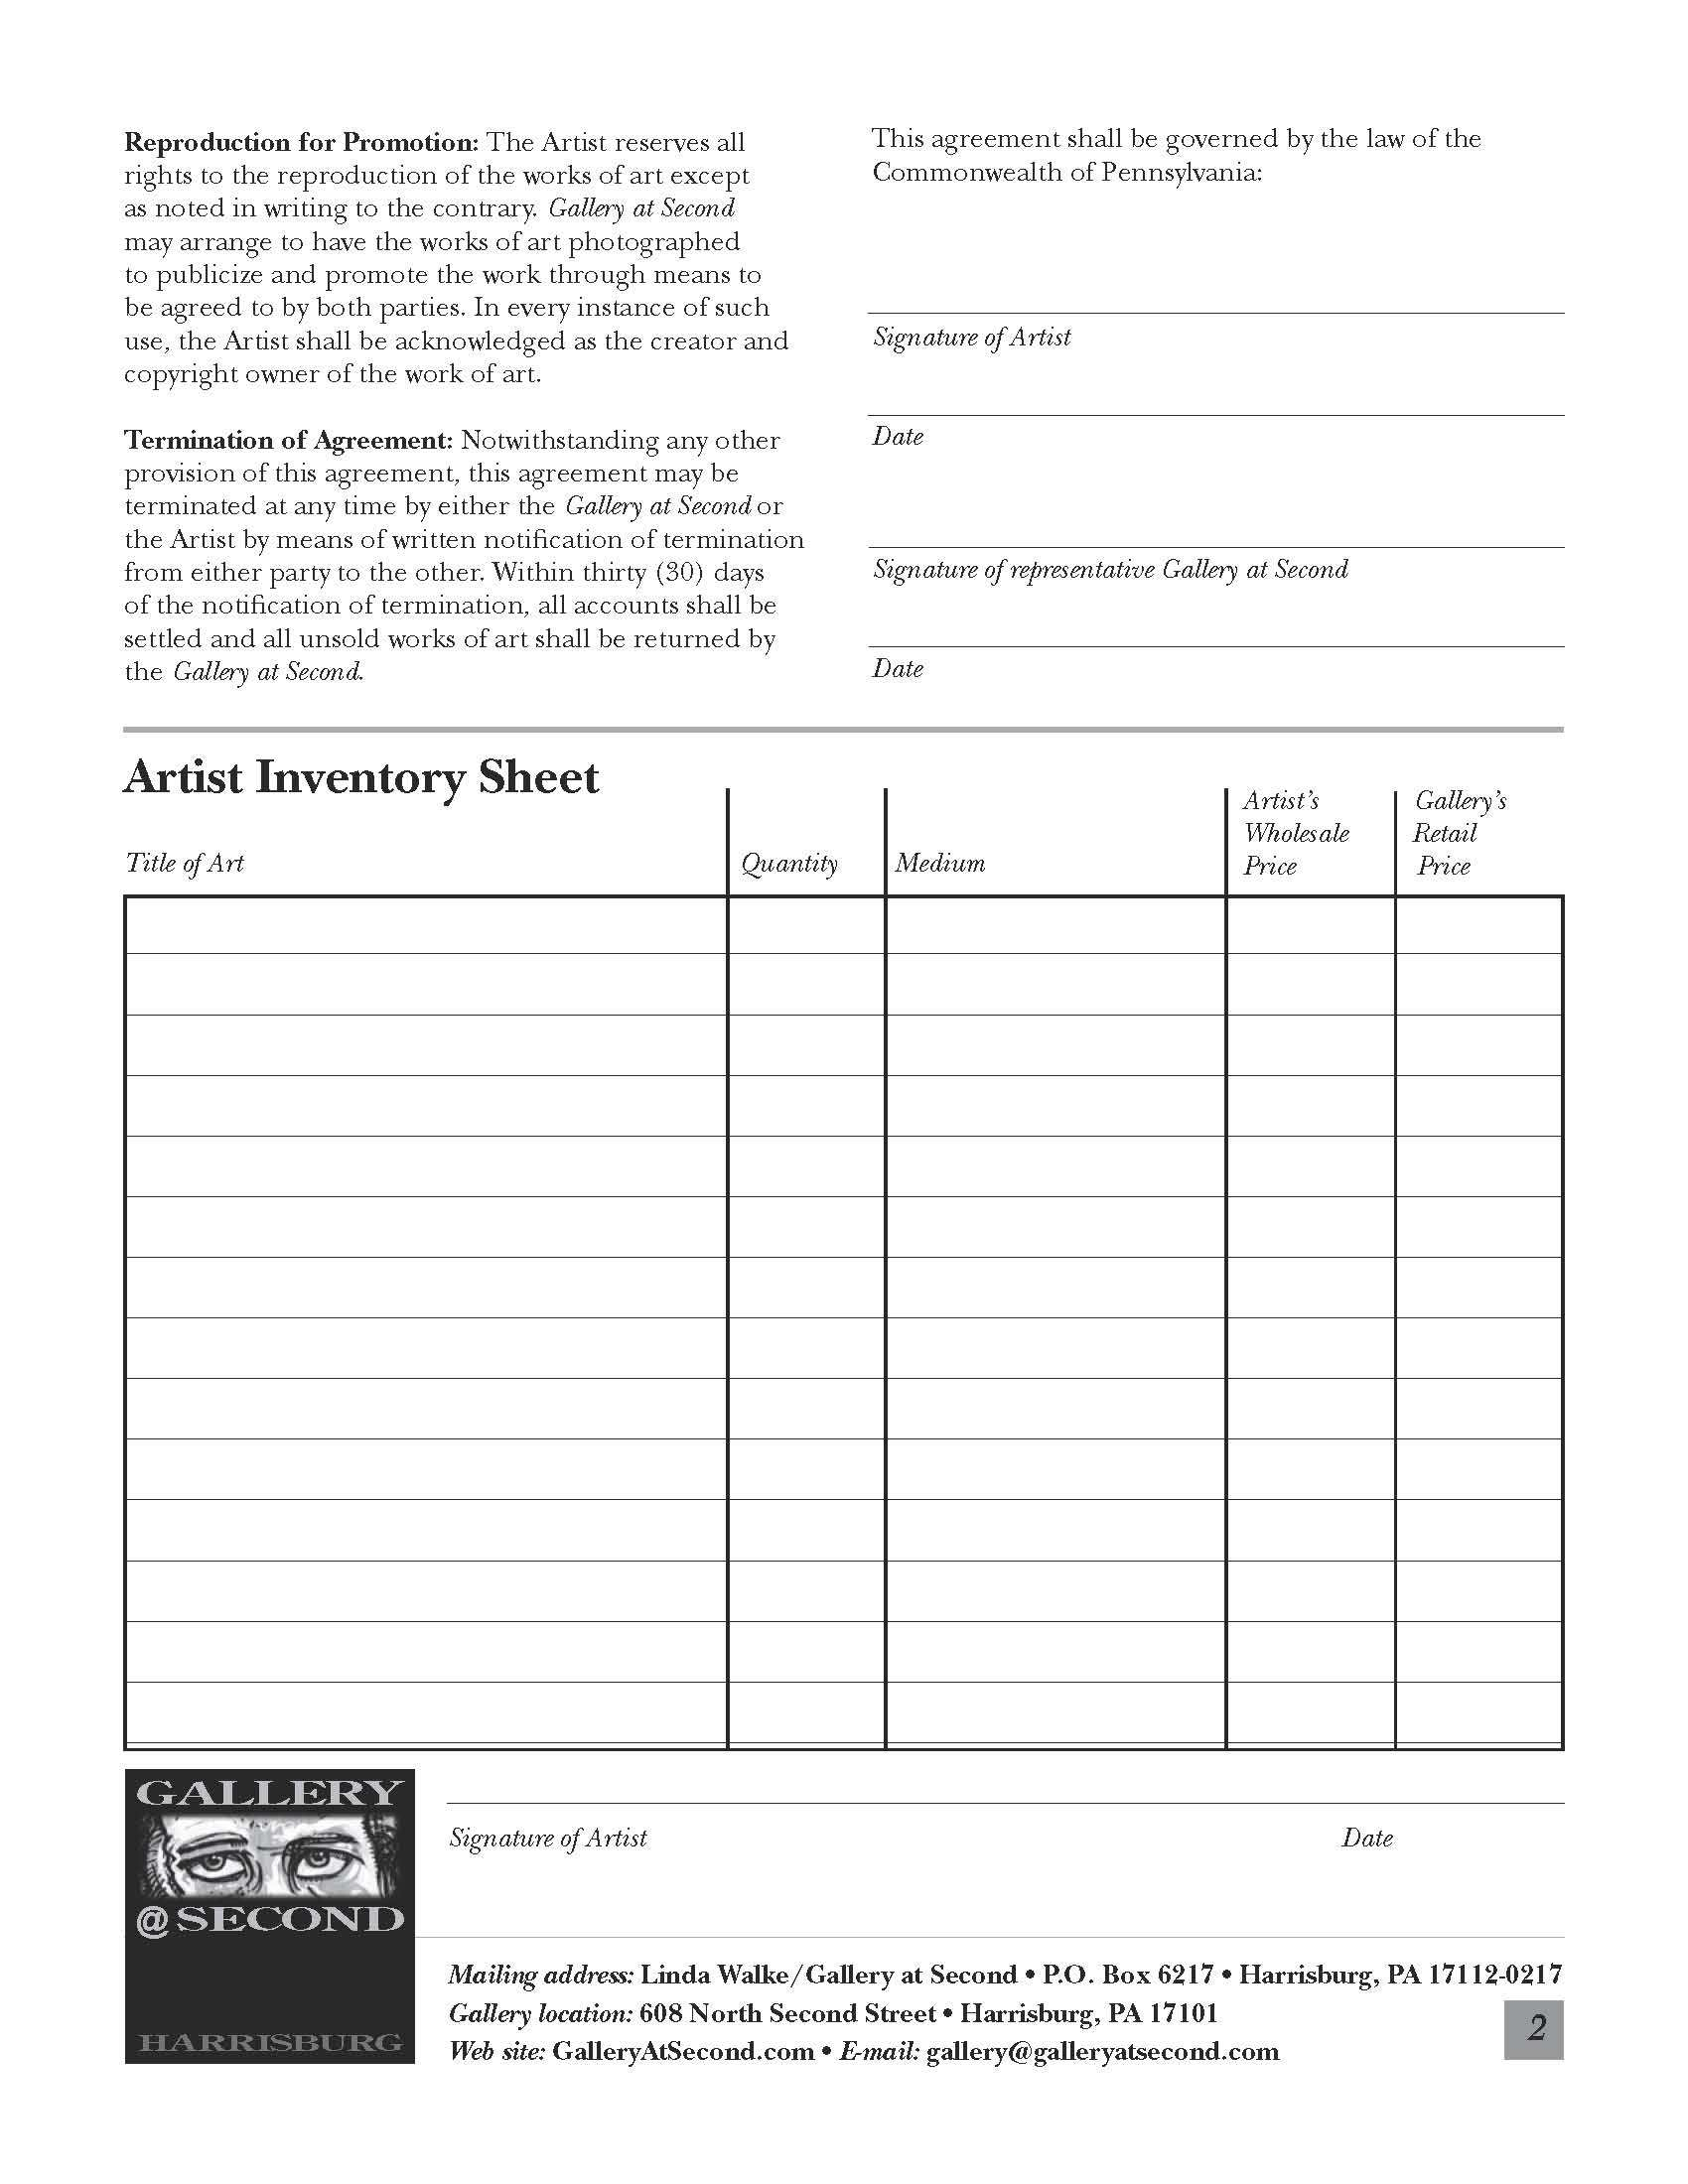 Clothing Consignment Agreement Template Consignment Agreement Pdf 79755 Agreement Consignment Agreement Form